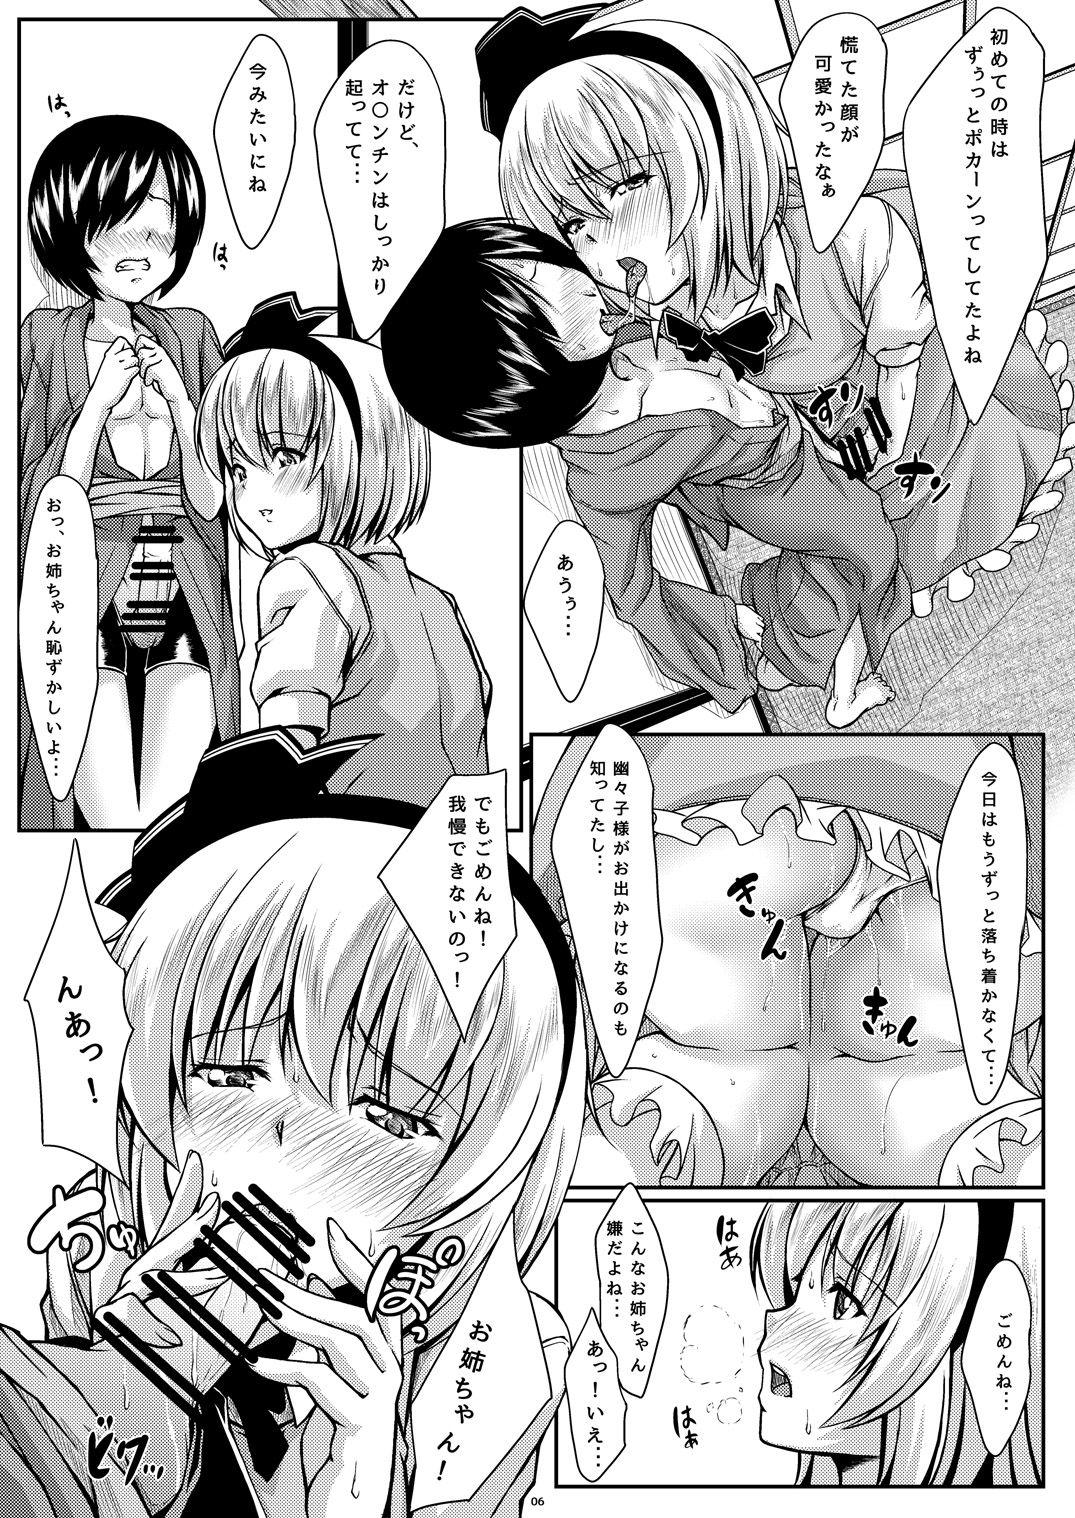 Analsex Onee-chan to no Myon na Kankei - Touhou project Mother fuck - Page 5